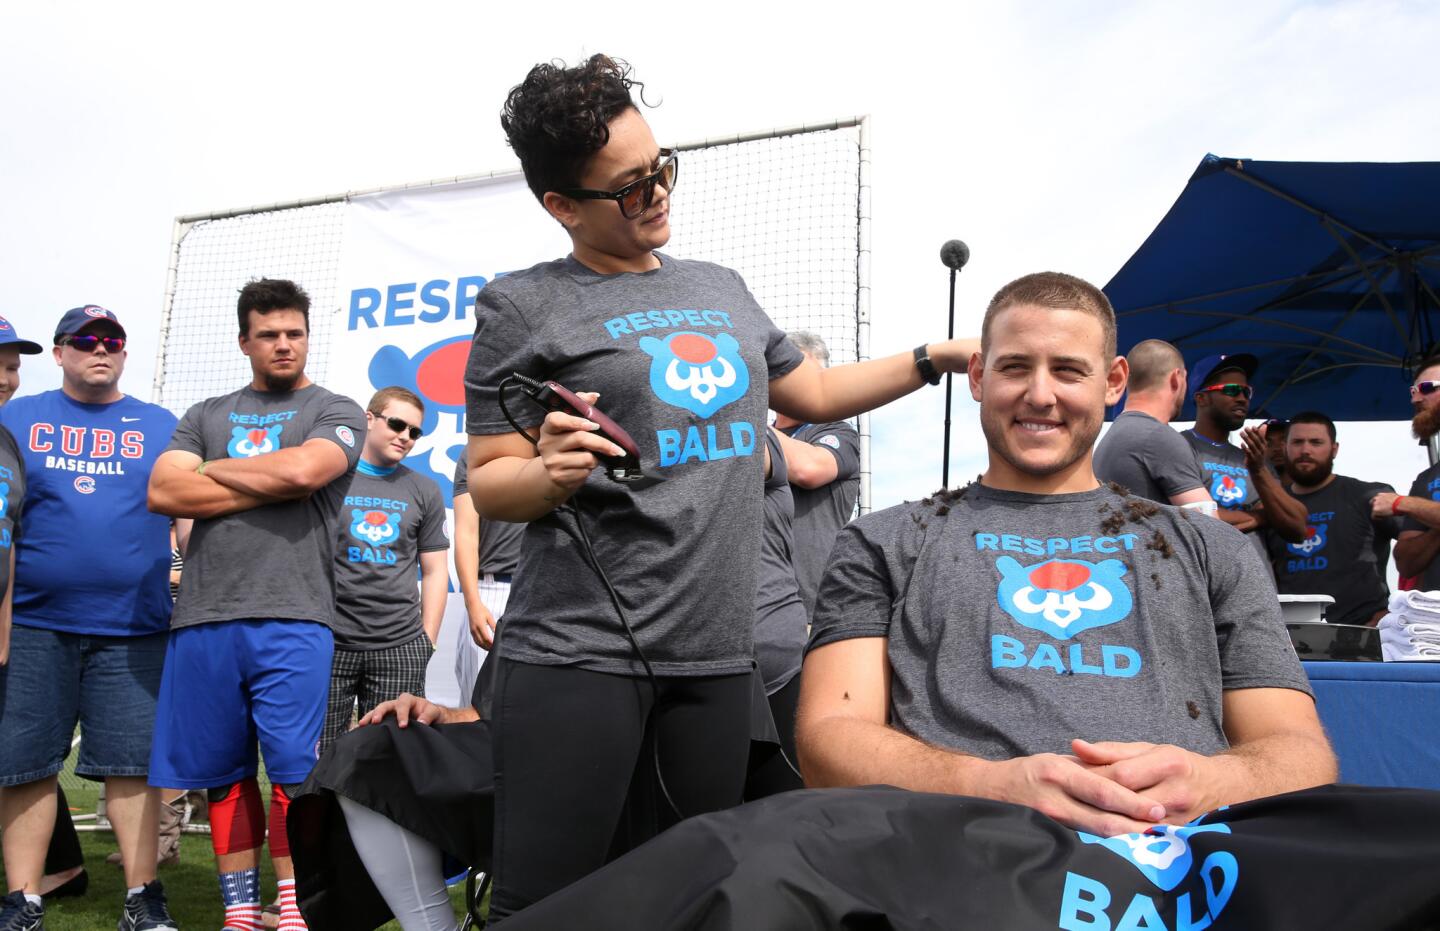 Cubs first baseman Anthony Rizzo has a laugh while having his head shaved as he and other members of the organization participated in the Respect Bald Fundraiser prior to a preseason game at Sloan Park in Mesa, Ariz., on Saturday, March 5, 2016. Rizzo, manager Joe Maddon, Kyle Schwarber, and Ben Zobrist were among those who shaved their heads to benefit pediatric cancer research and support.